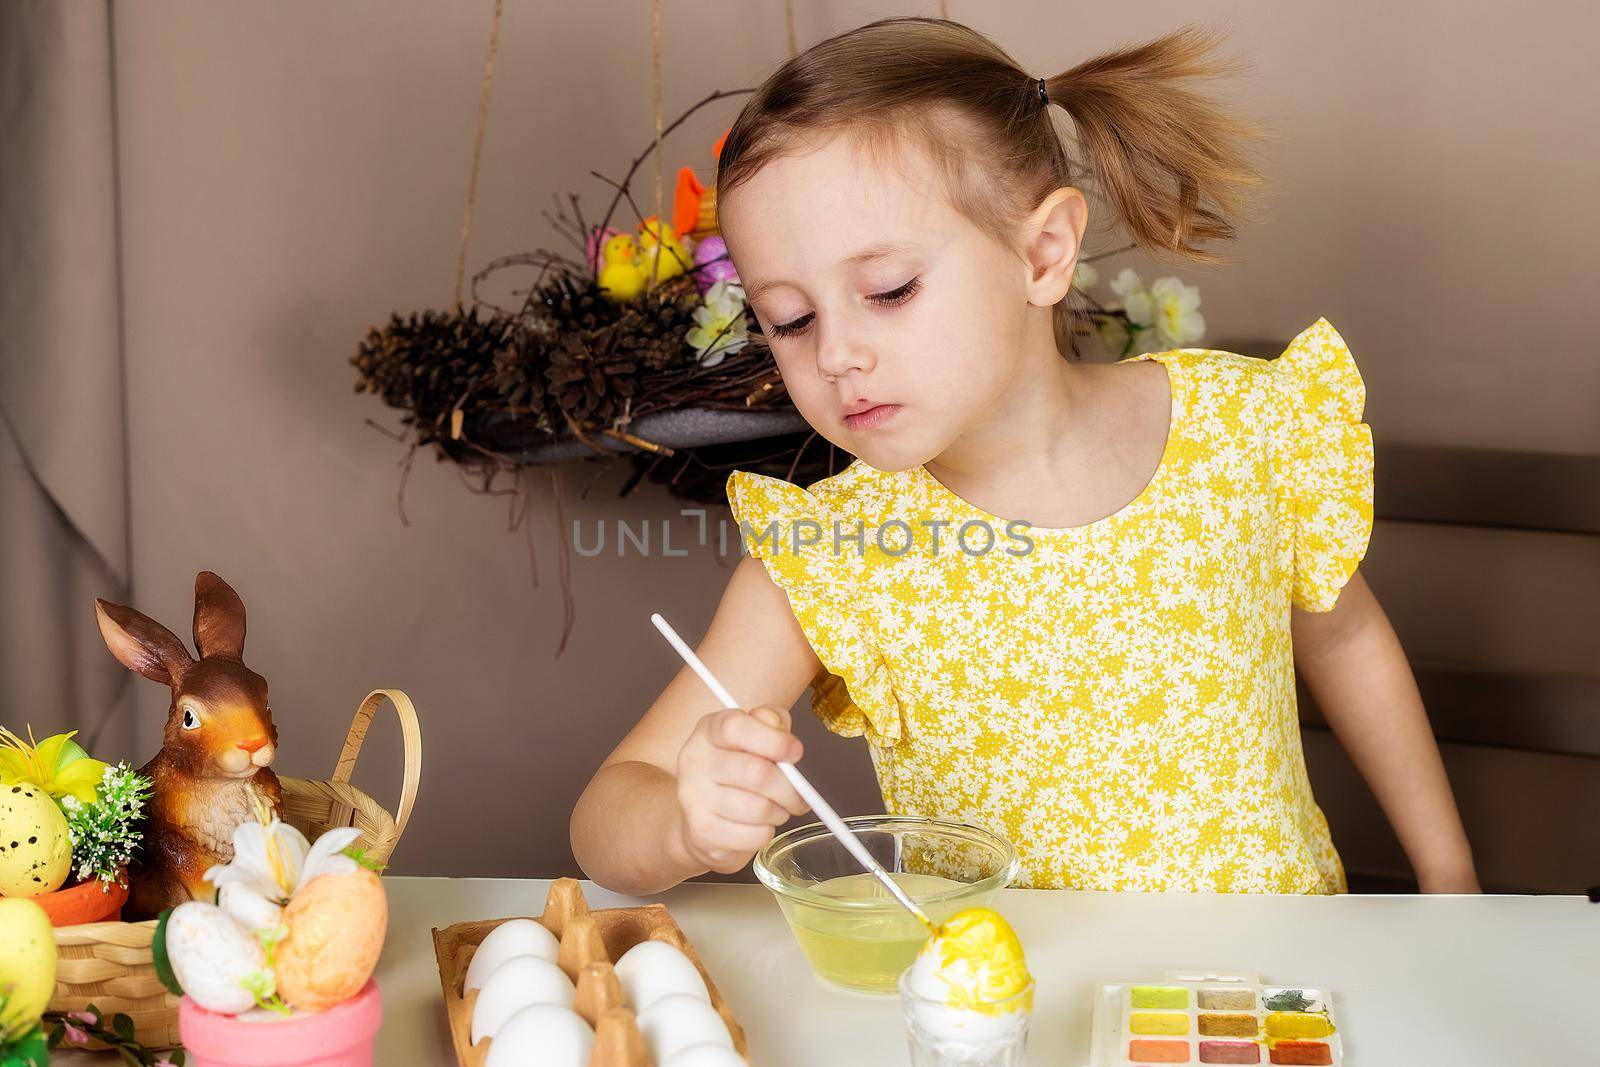 A small Caucasian girl of 5 years old paints eggs with special water paints for the Christian spring holiday of Easter. The girl is dressed in a yellow floral dress and has ponytails.